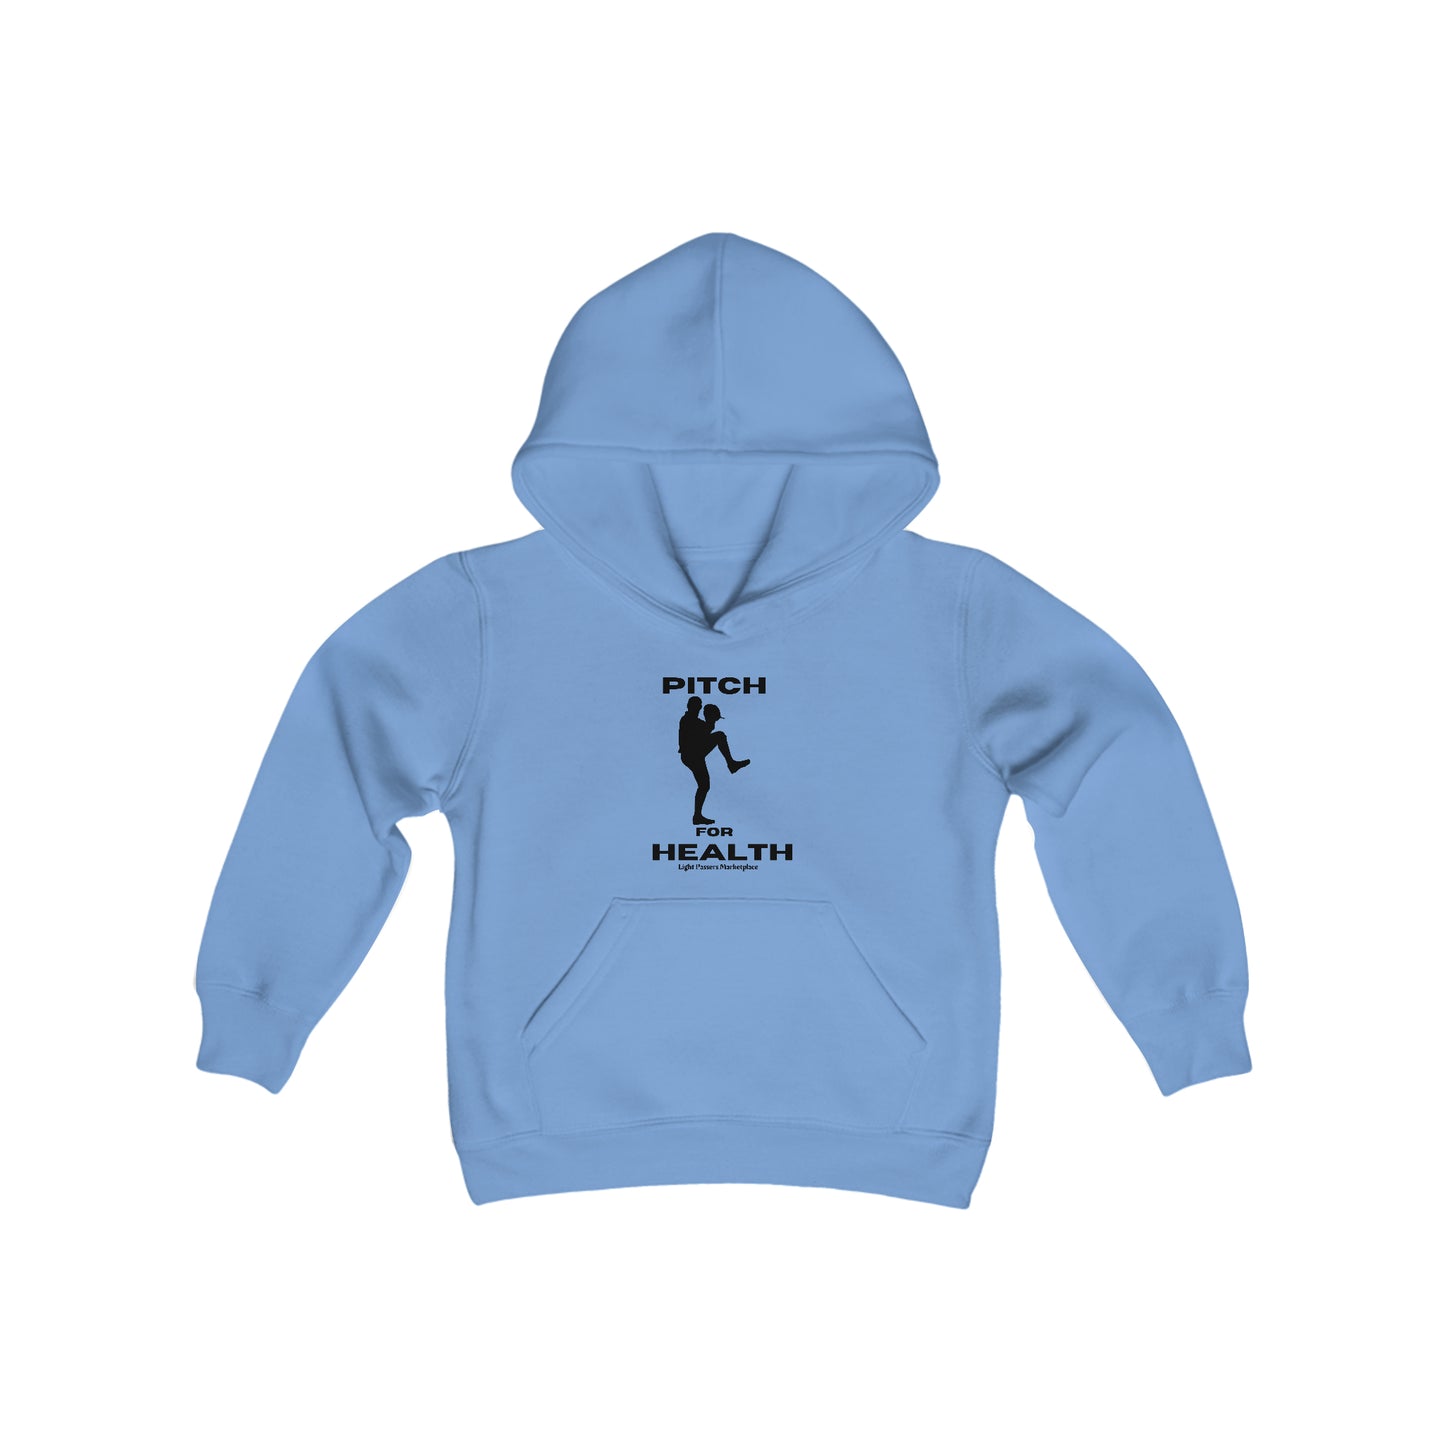 Light Passers Marketplace Pitch Health Youth Hooded Sweatshirt Fitness